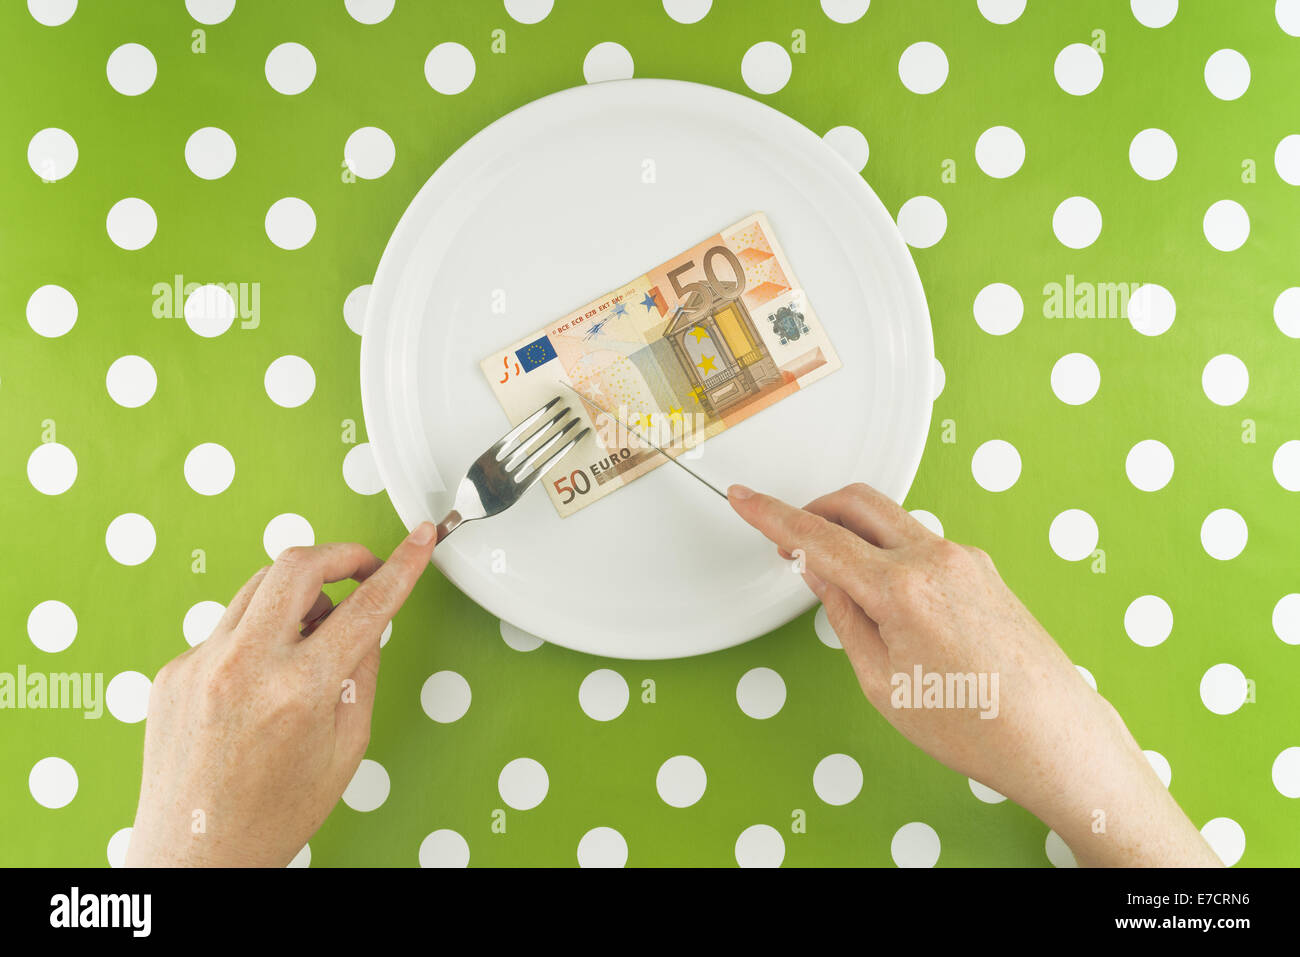 Woman eating fifty euros banknote for dinner, top view Stock Photo